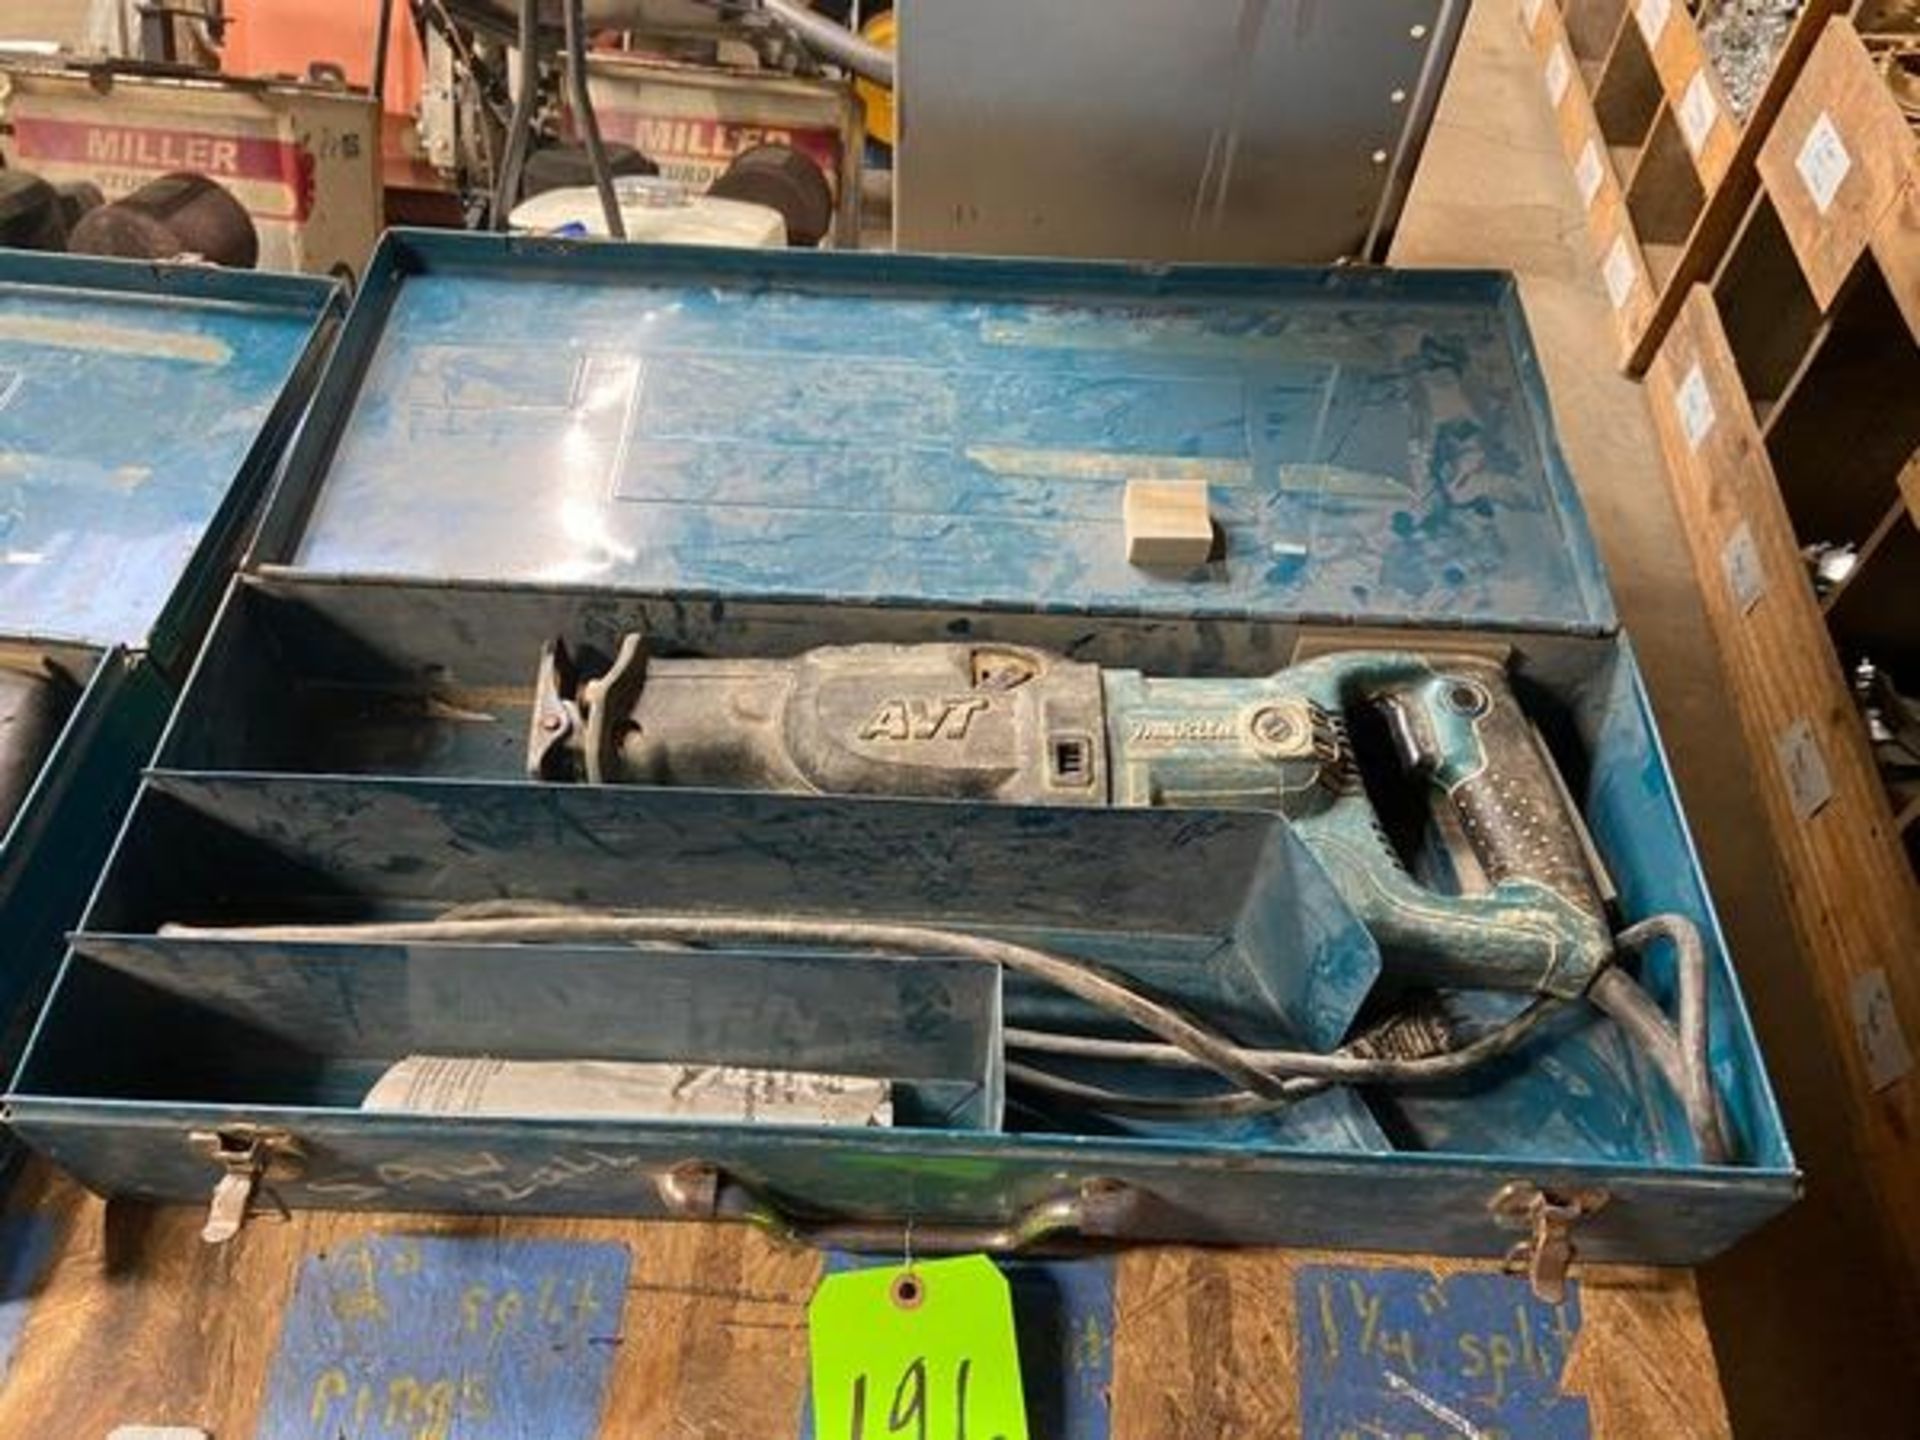 Makita AVT Sawzall Power Tool, S/N 999, with Power Cord & Hard Case (LOCATED IN MONROEVILLE, PA)